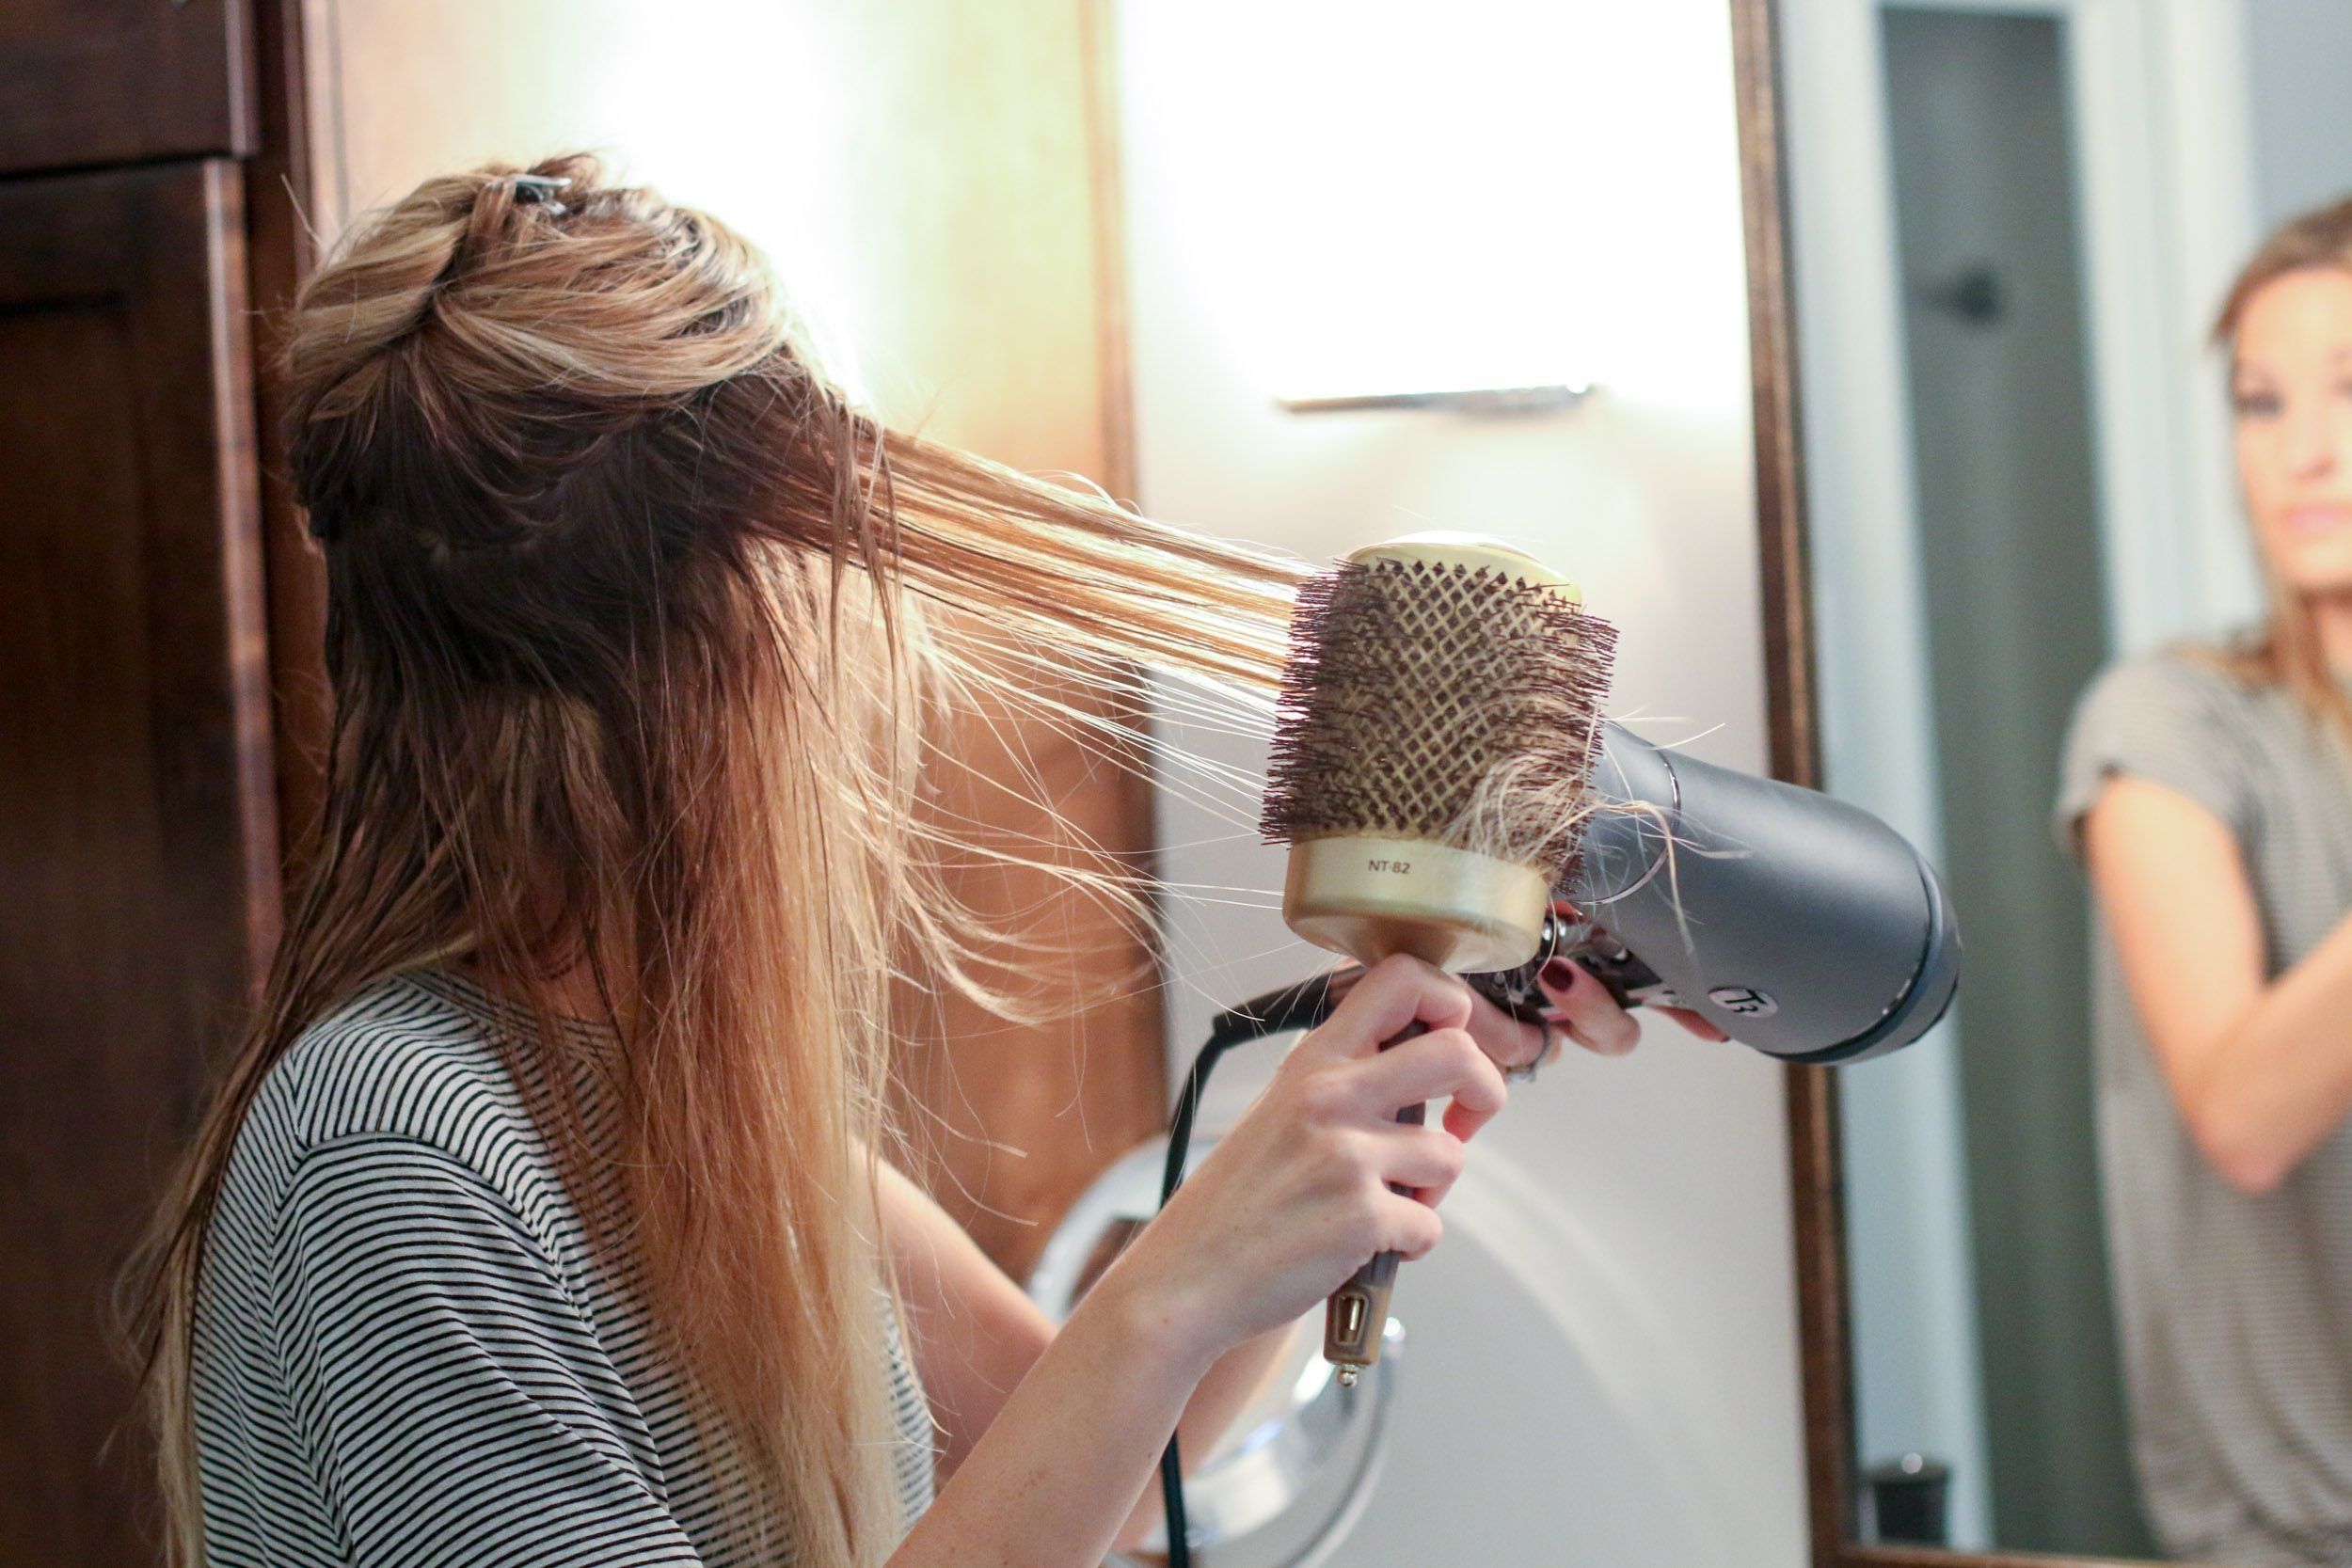 Review of the best Panasonic hair dryers in 2020